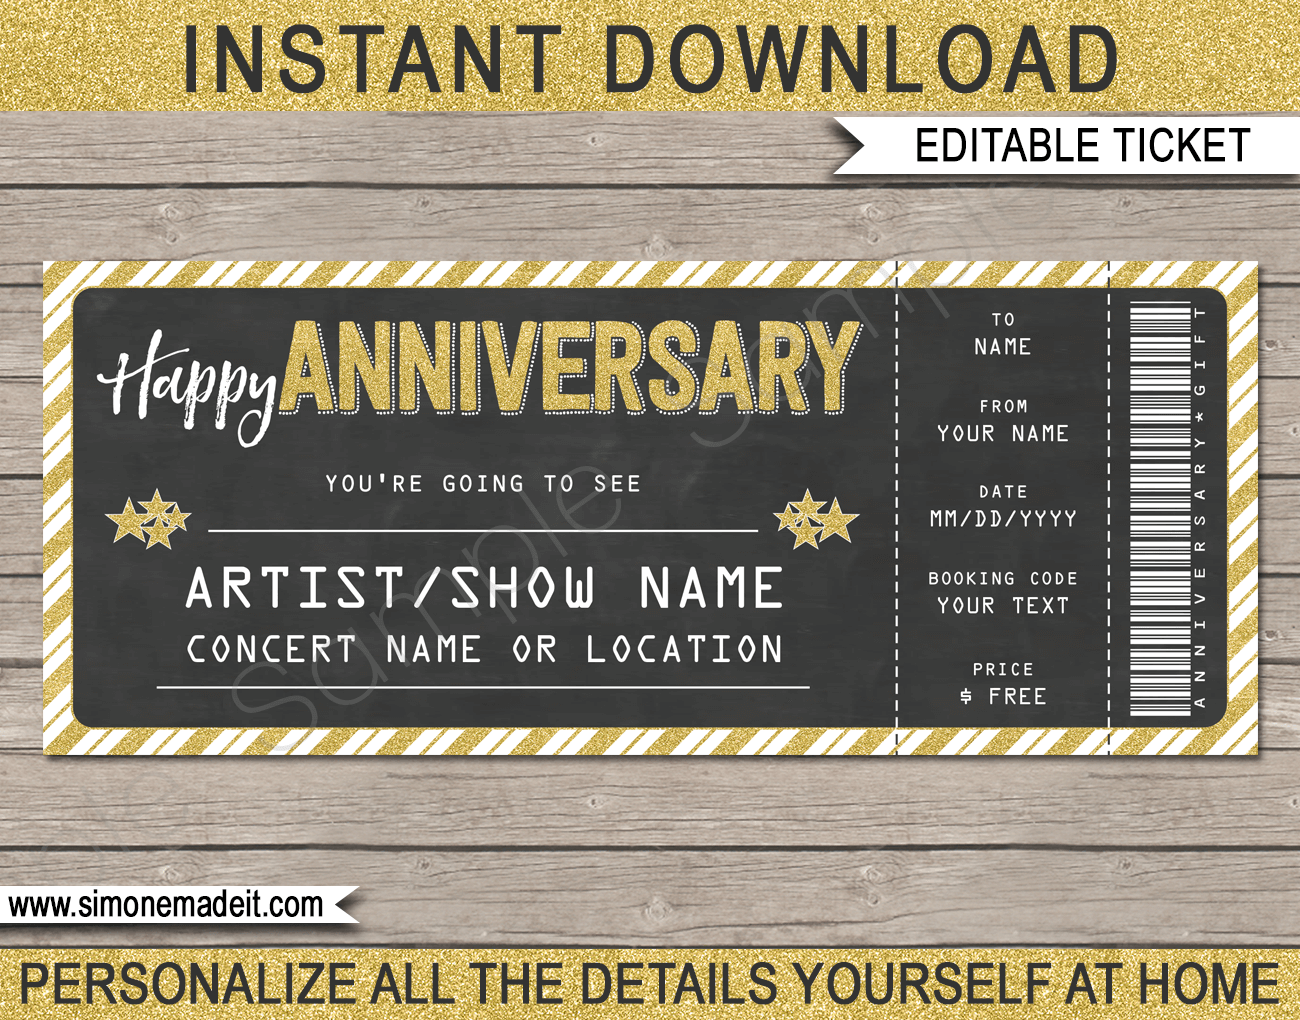 Concert Ticket Gift template.Printable Anniversary Concert Ticket Gift template - Last Minute Surprise Gift - Concert, Show,